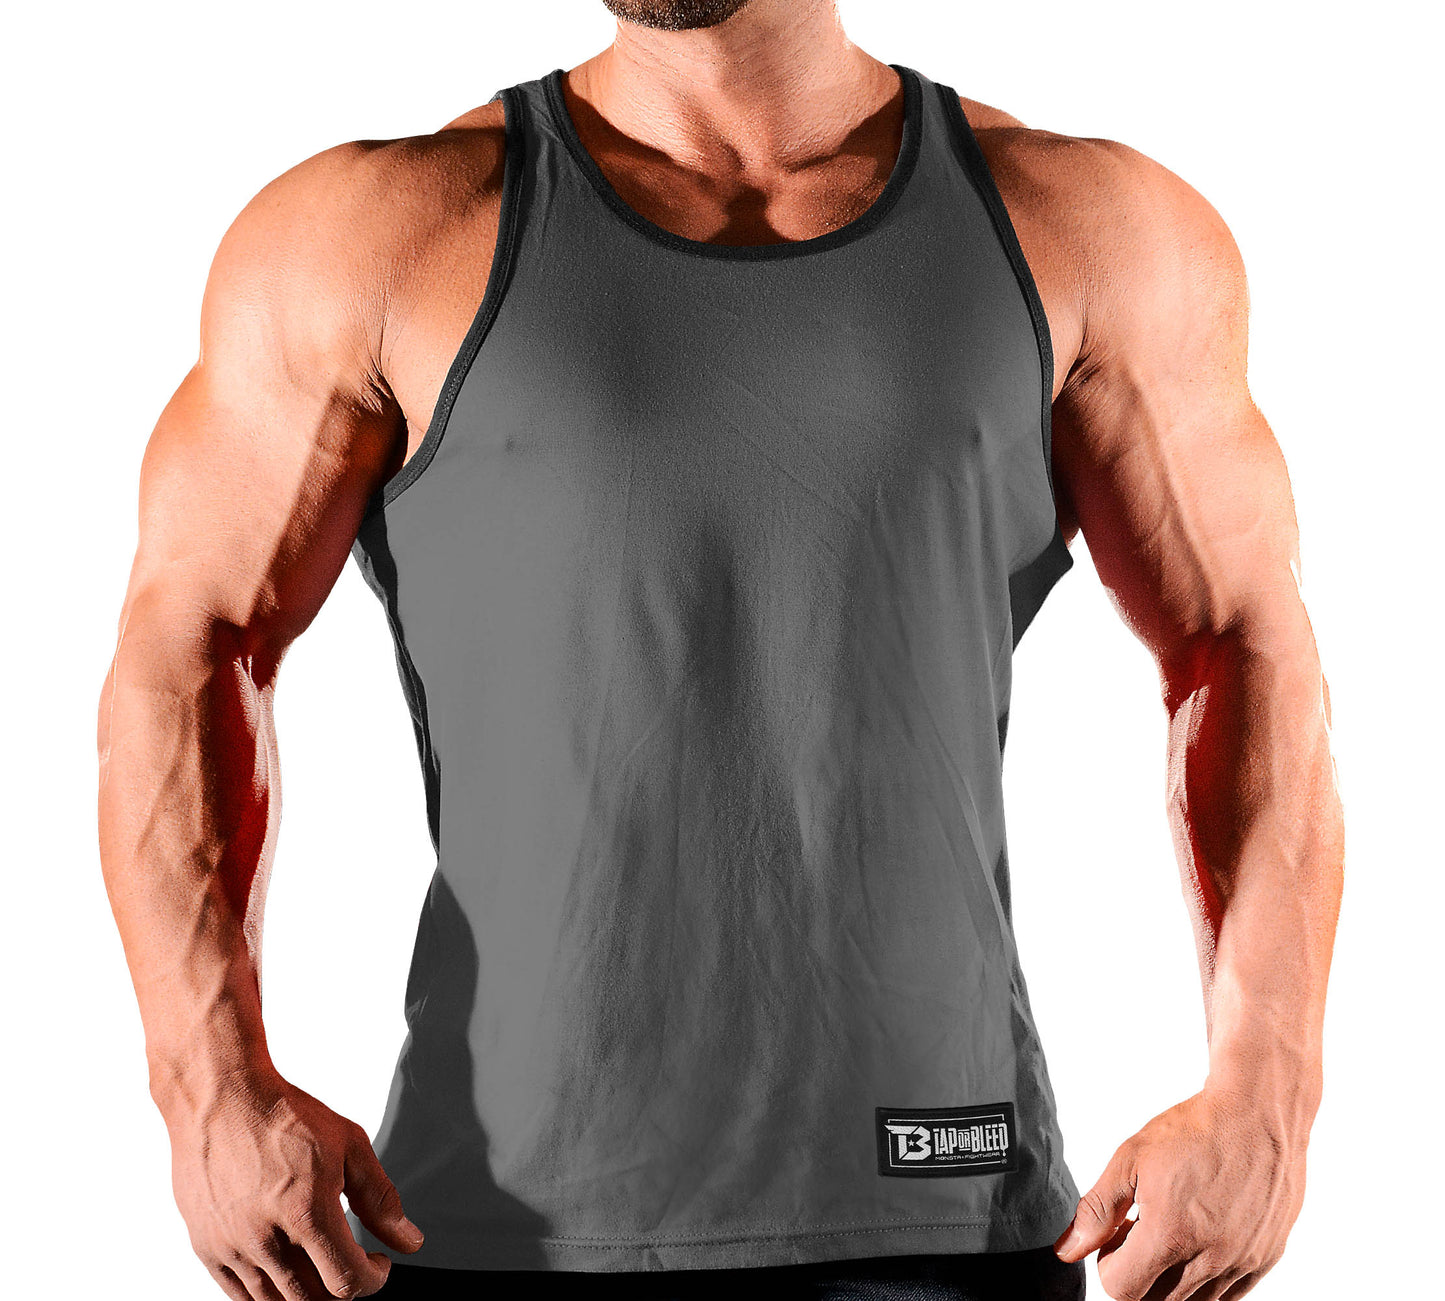 Elite Series: Tap or Bleed Workout Clothes-000: Black Body